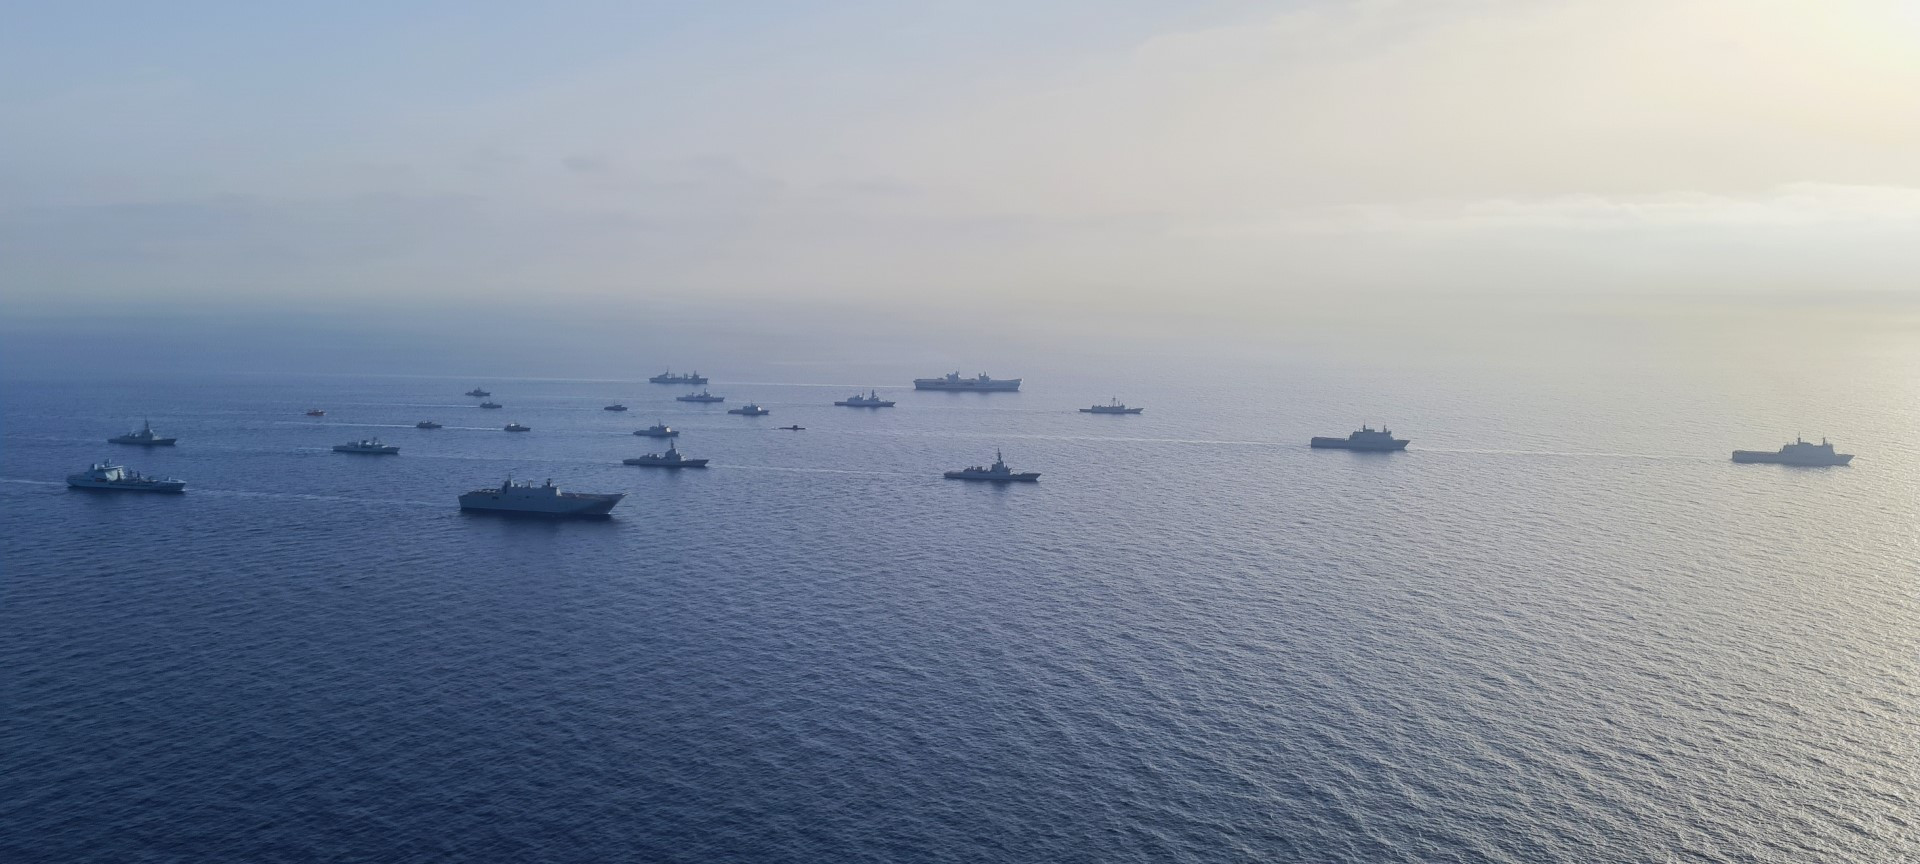 The Navy gets its strength in an exercise with 5,000 soldiers and 21 ships in southeastern Spanish waters